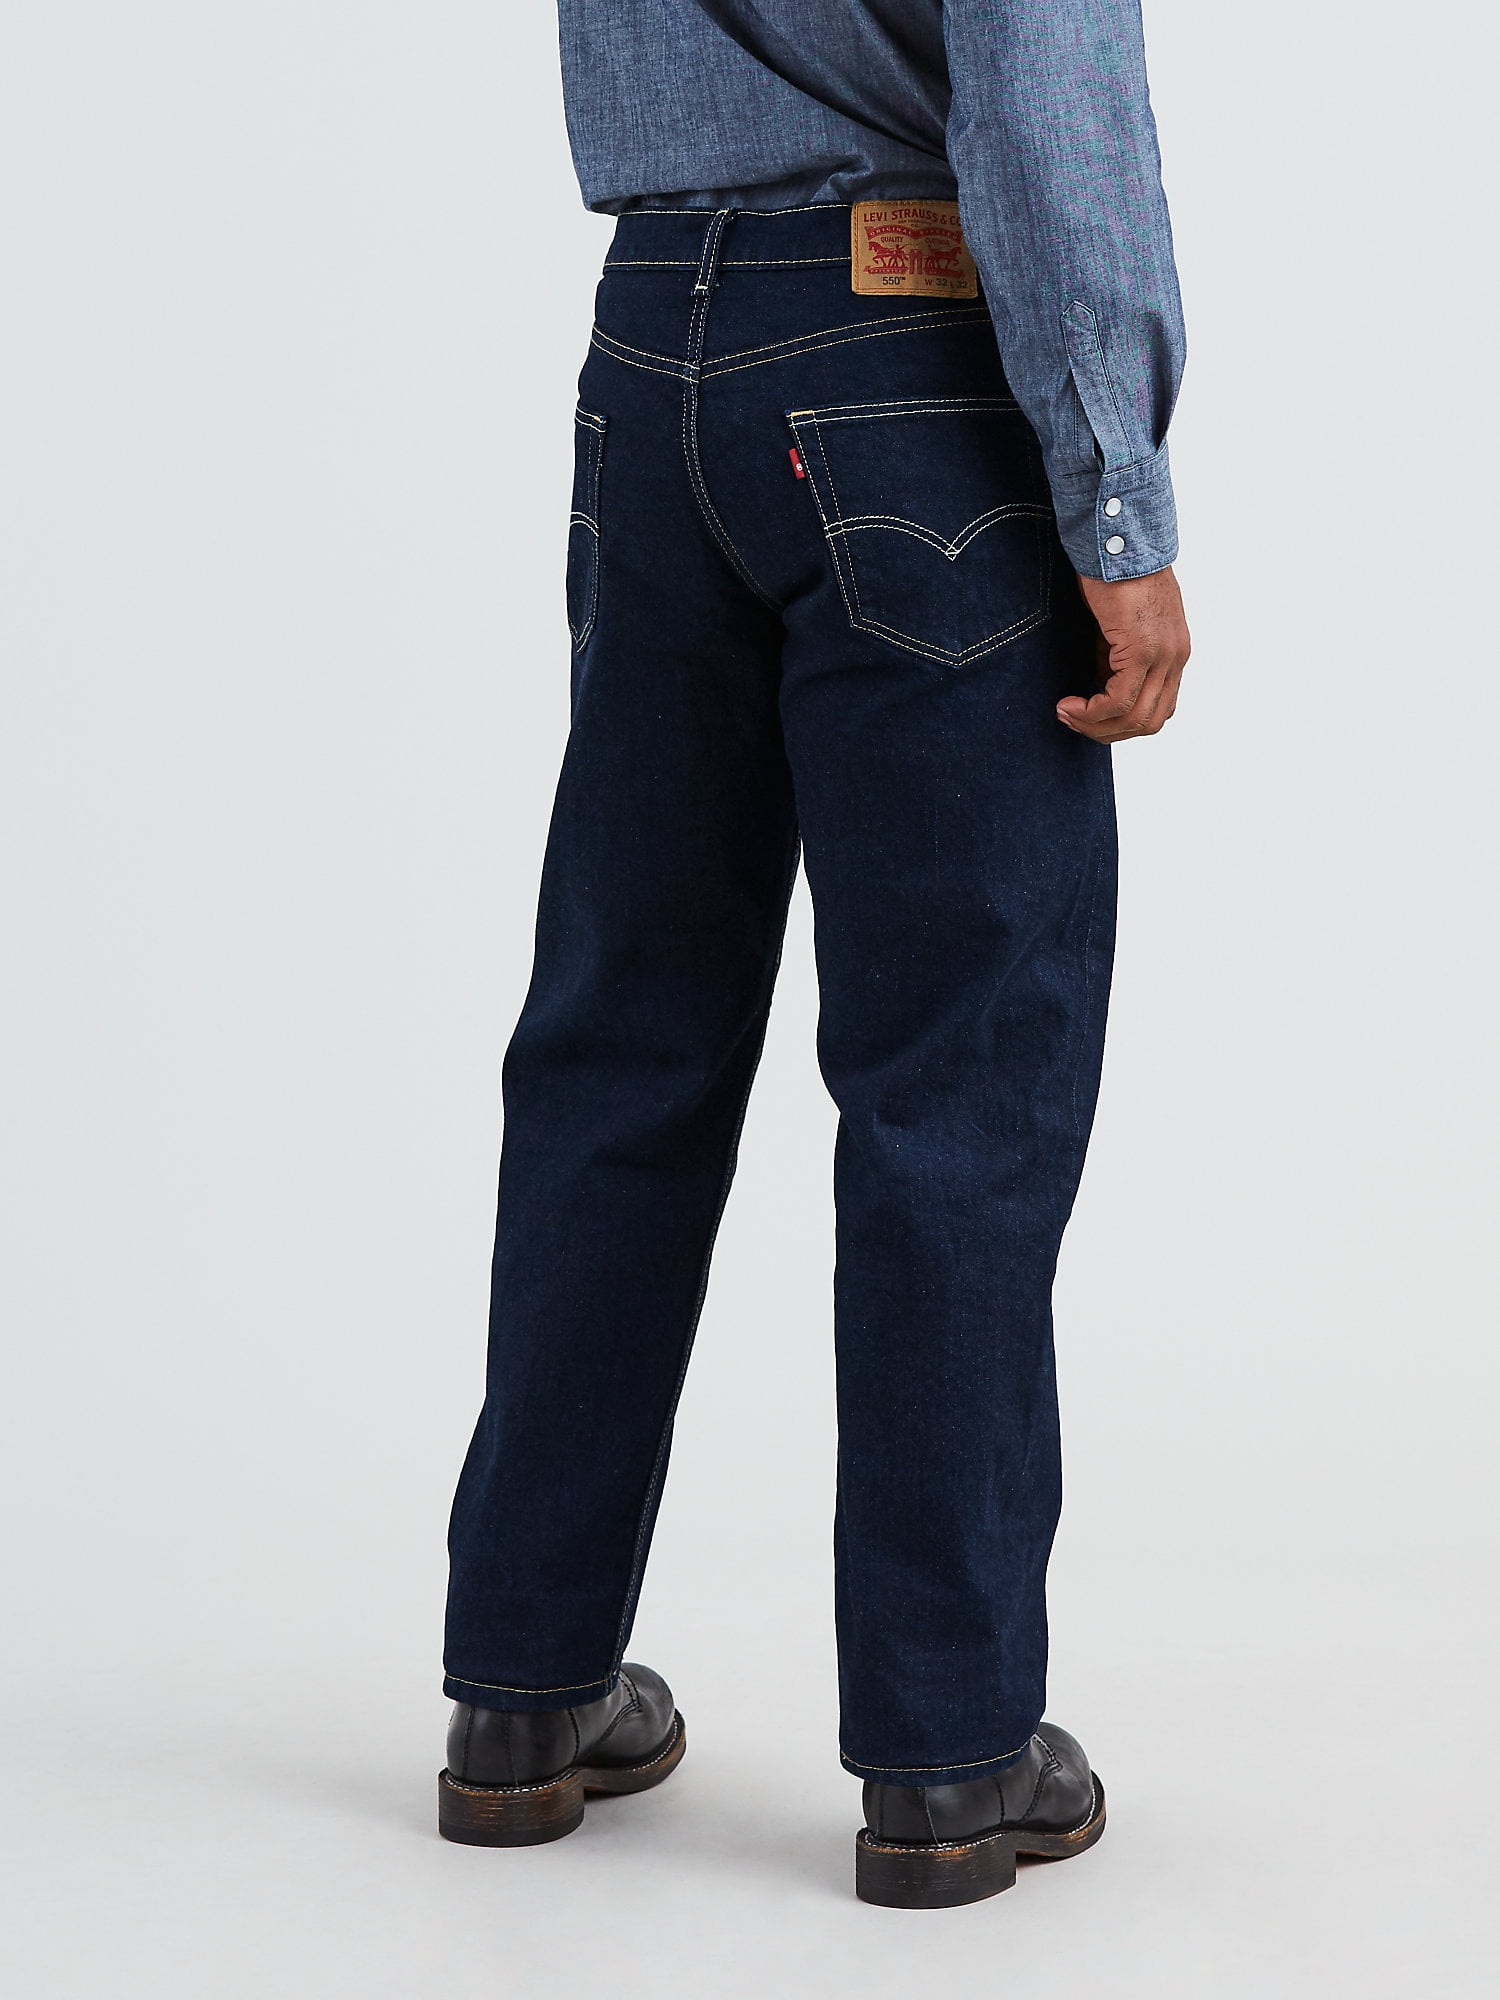 does walmart sell levis 550